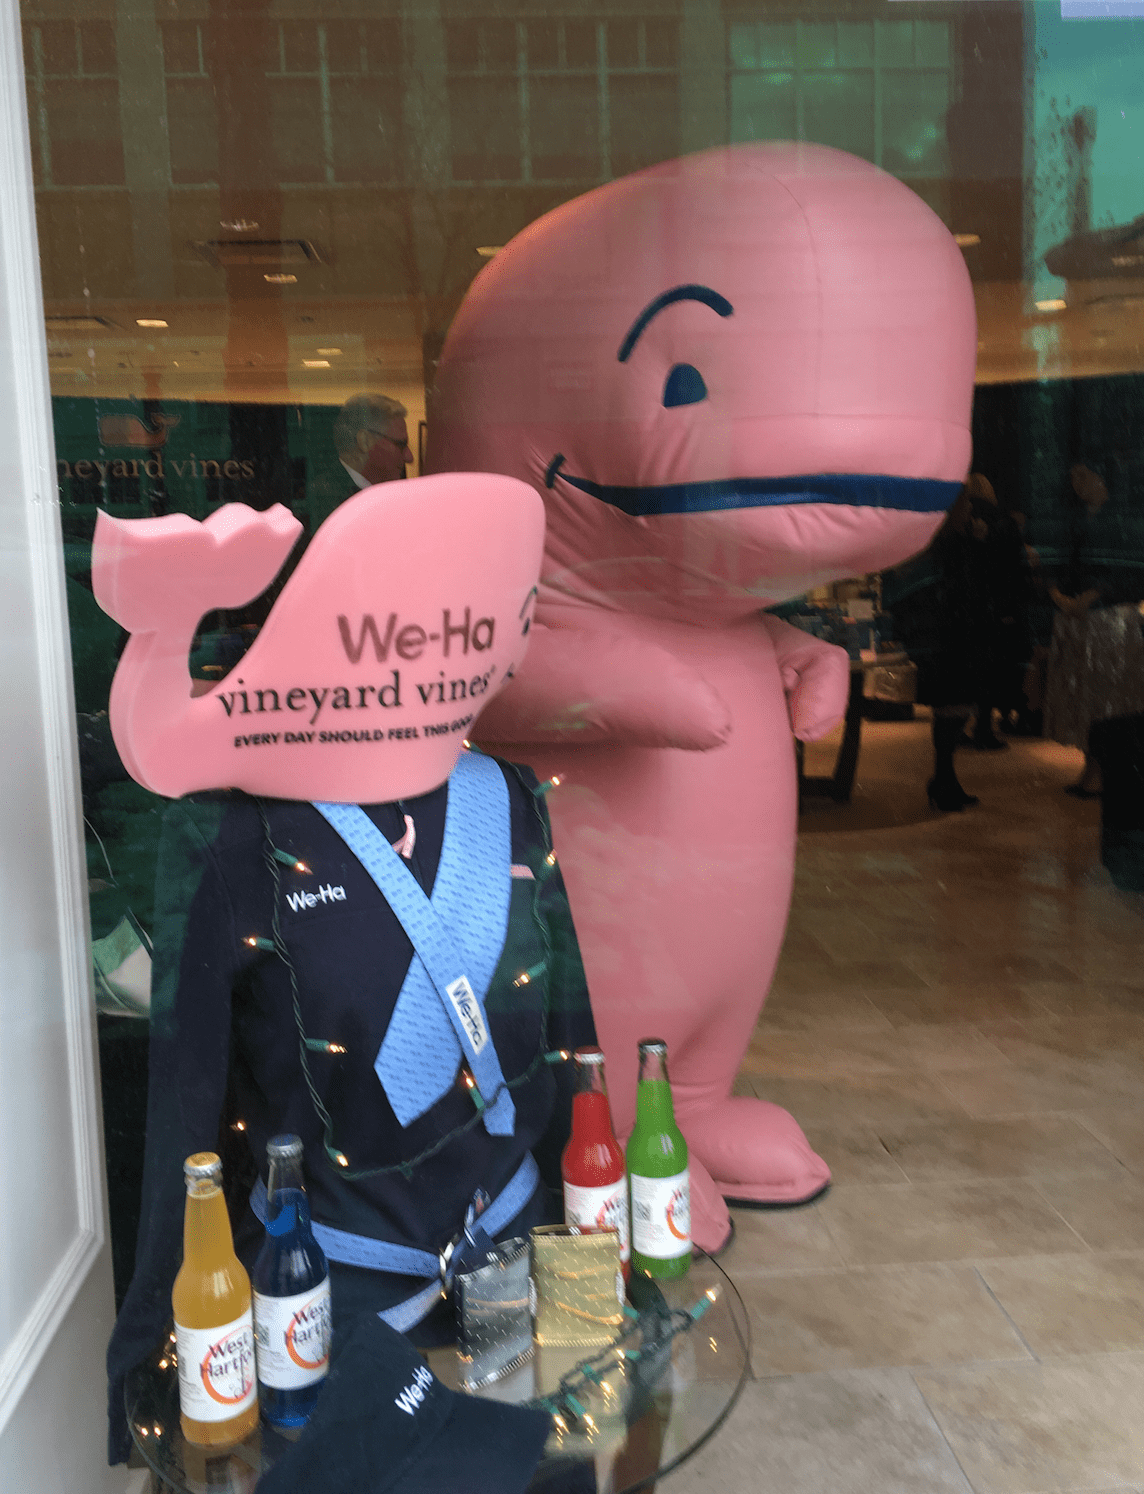 The Vineyard Vines Whale Mascot at the We-Ha Pop-Up Store in Blue Back Square. Photo credit: Joy Taylor